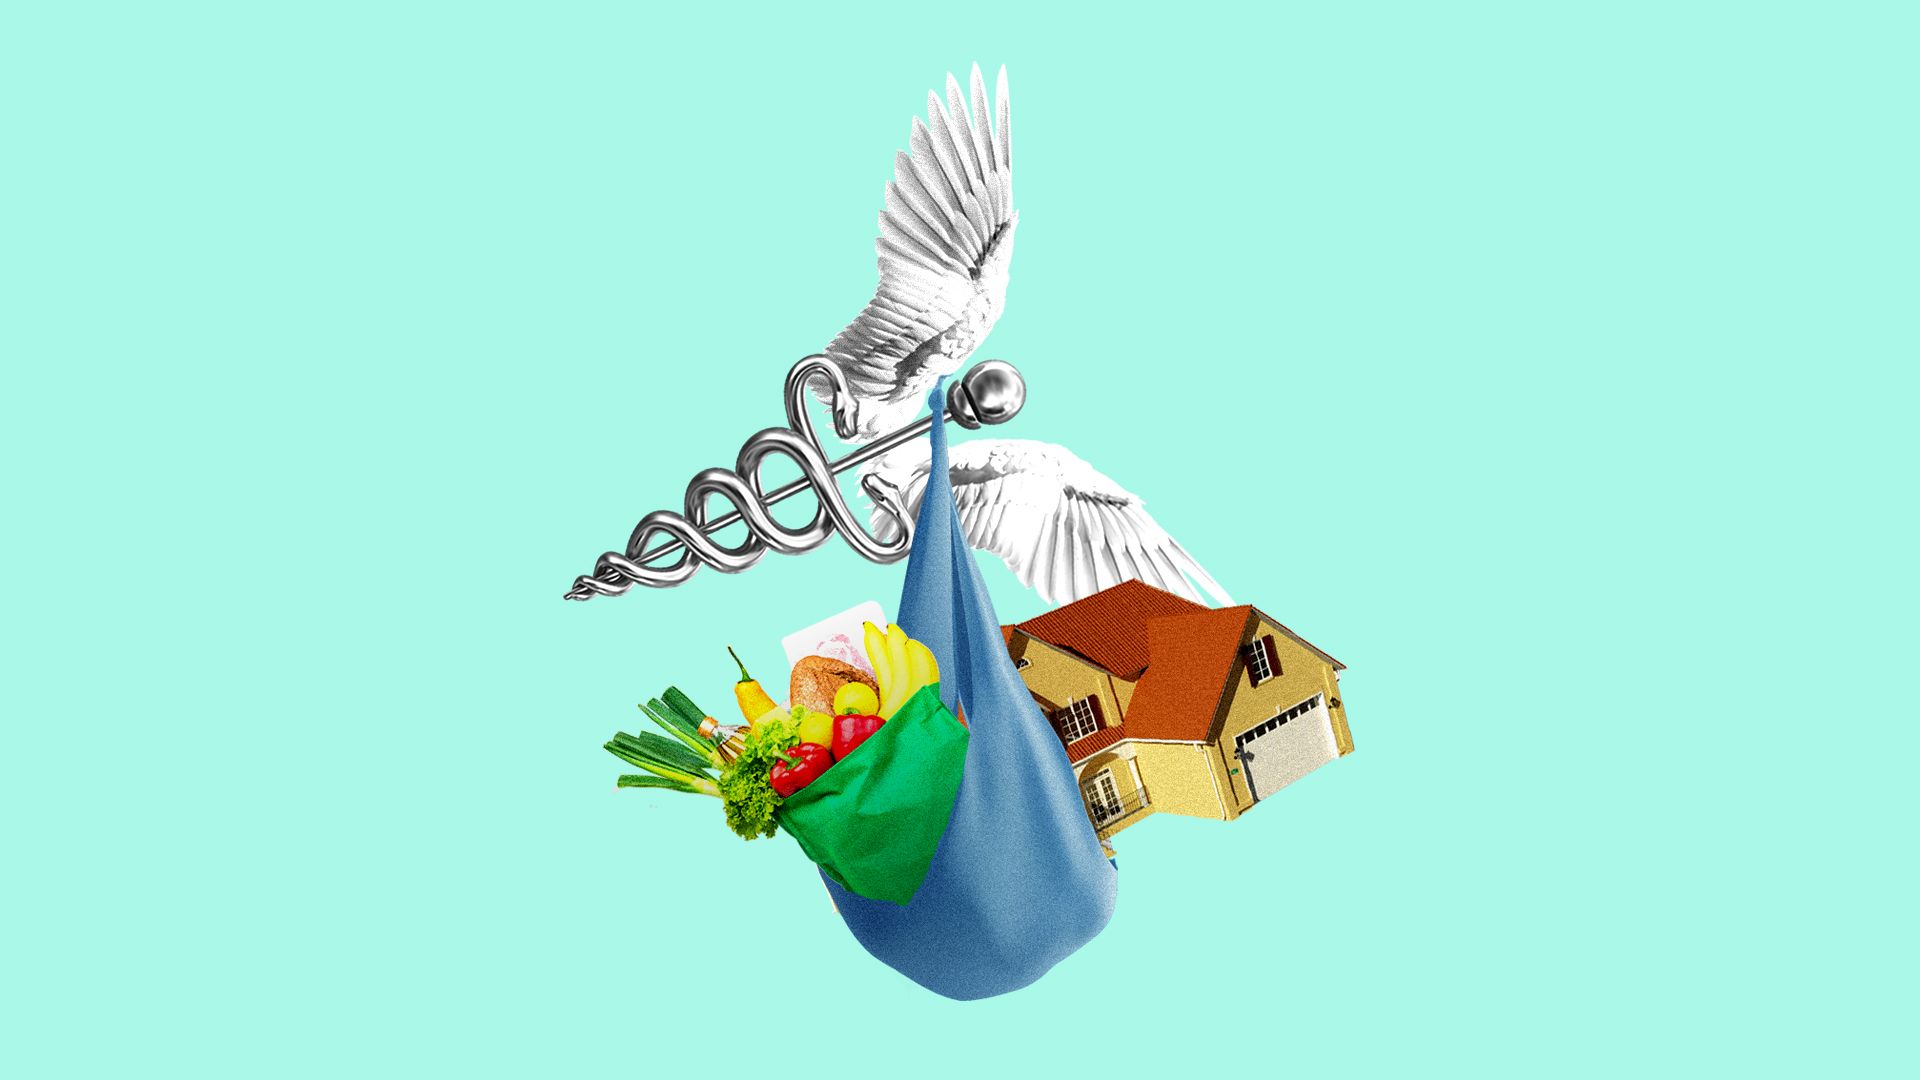 Illustration of flying caduceus carrying sack of groceries and a house